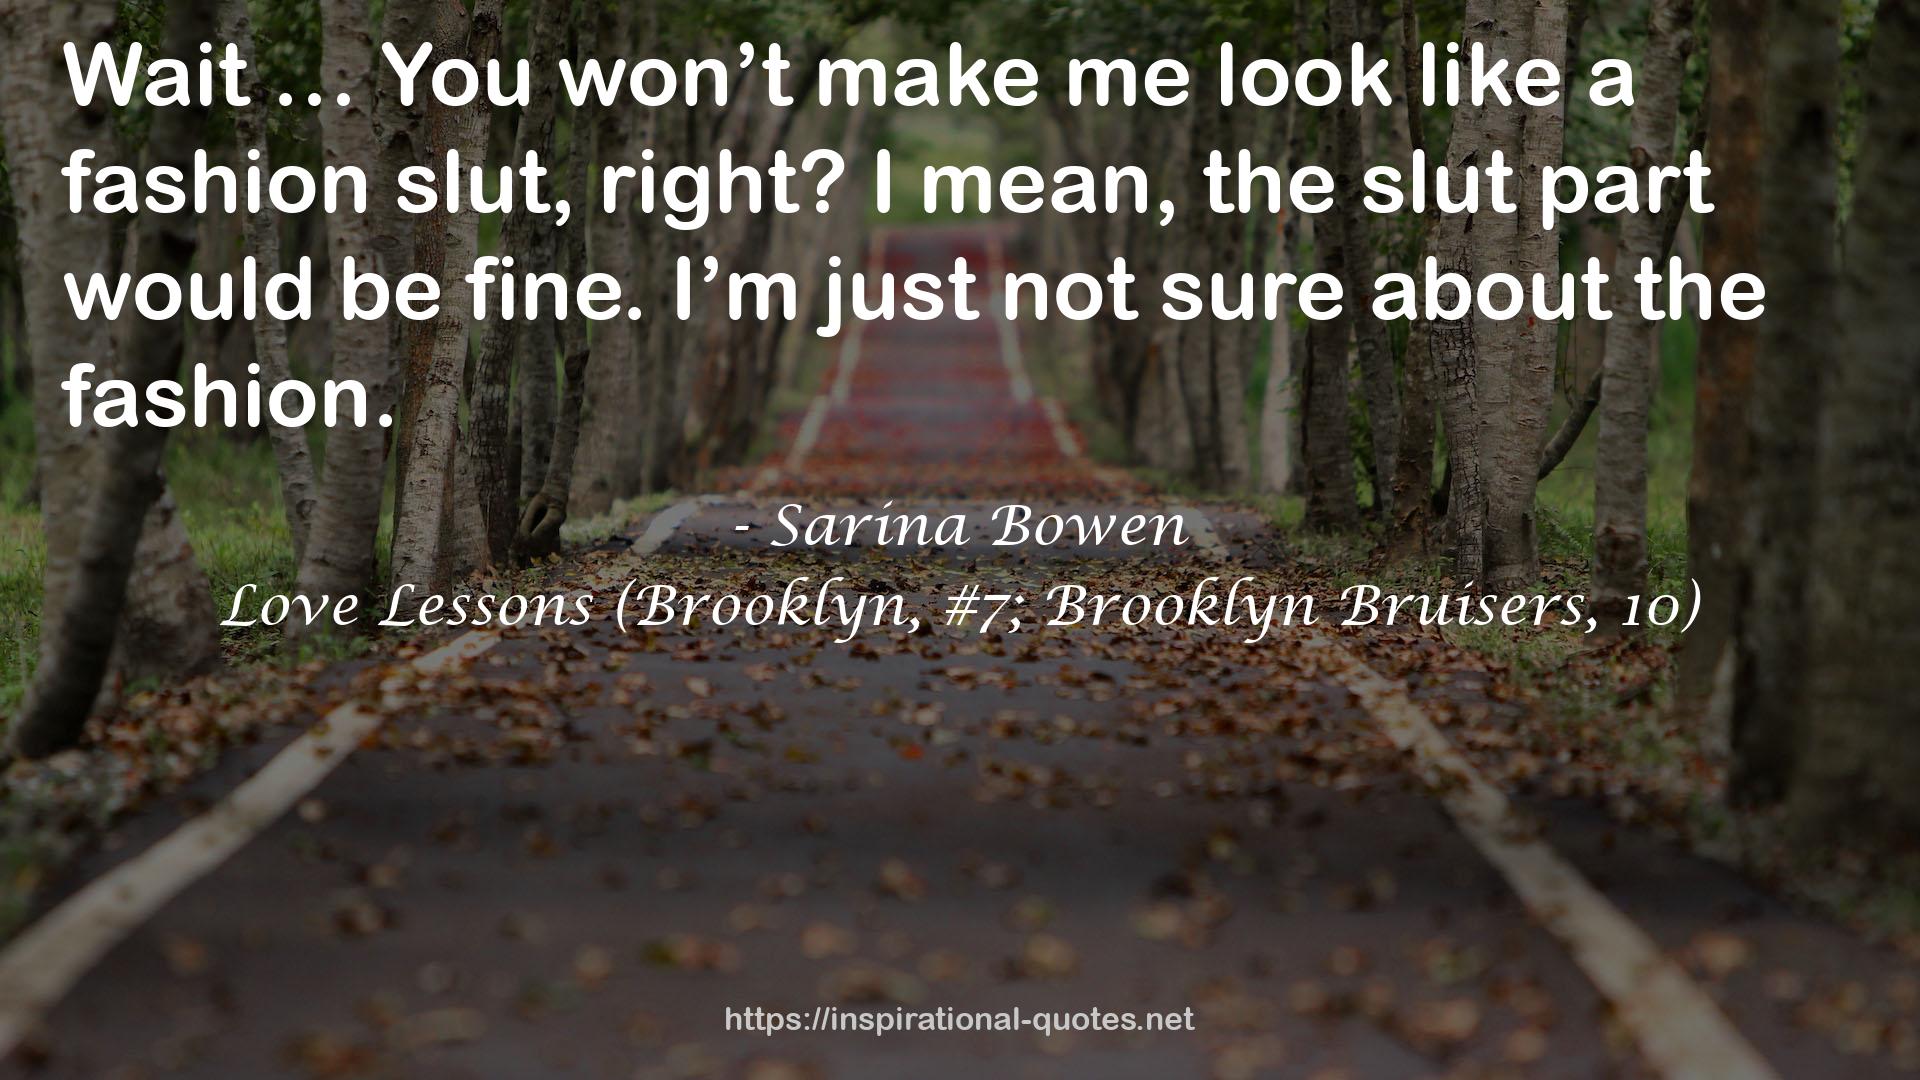 Love Lessons (Brooklyn, #7; Brooklyn Bruisers, 10) QUOTES